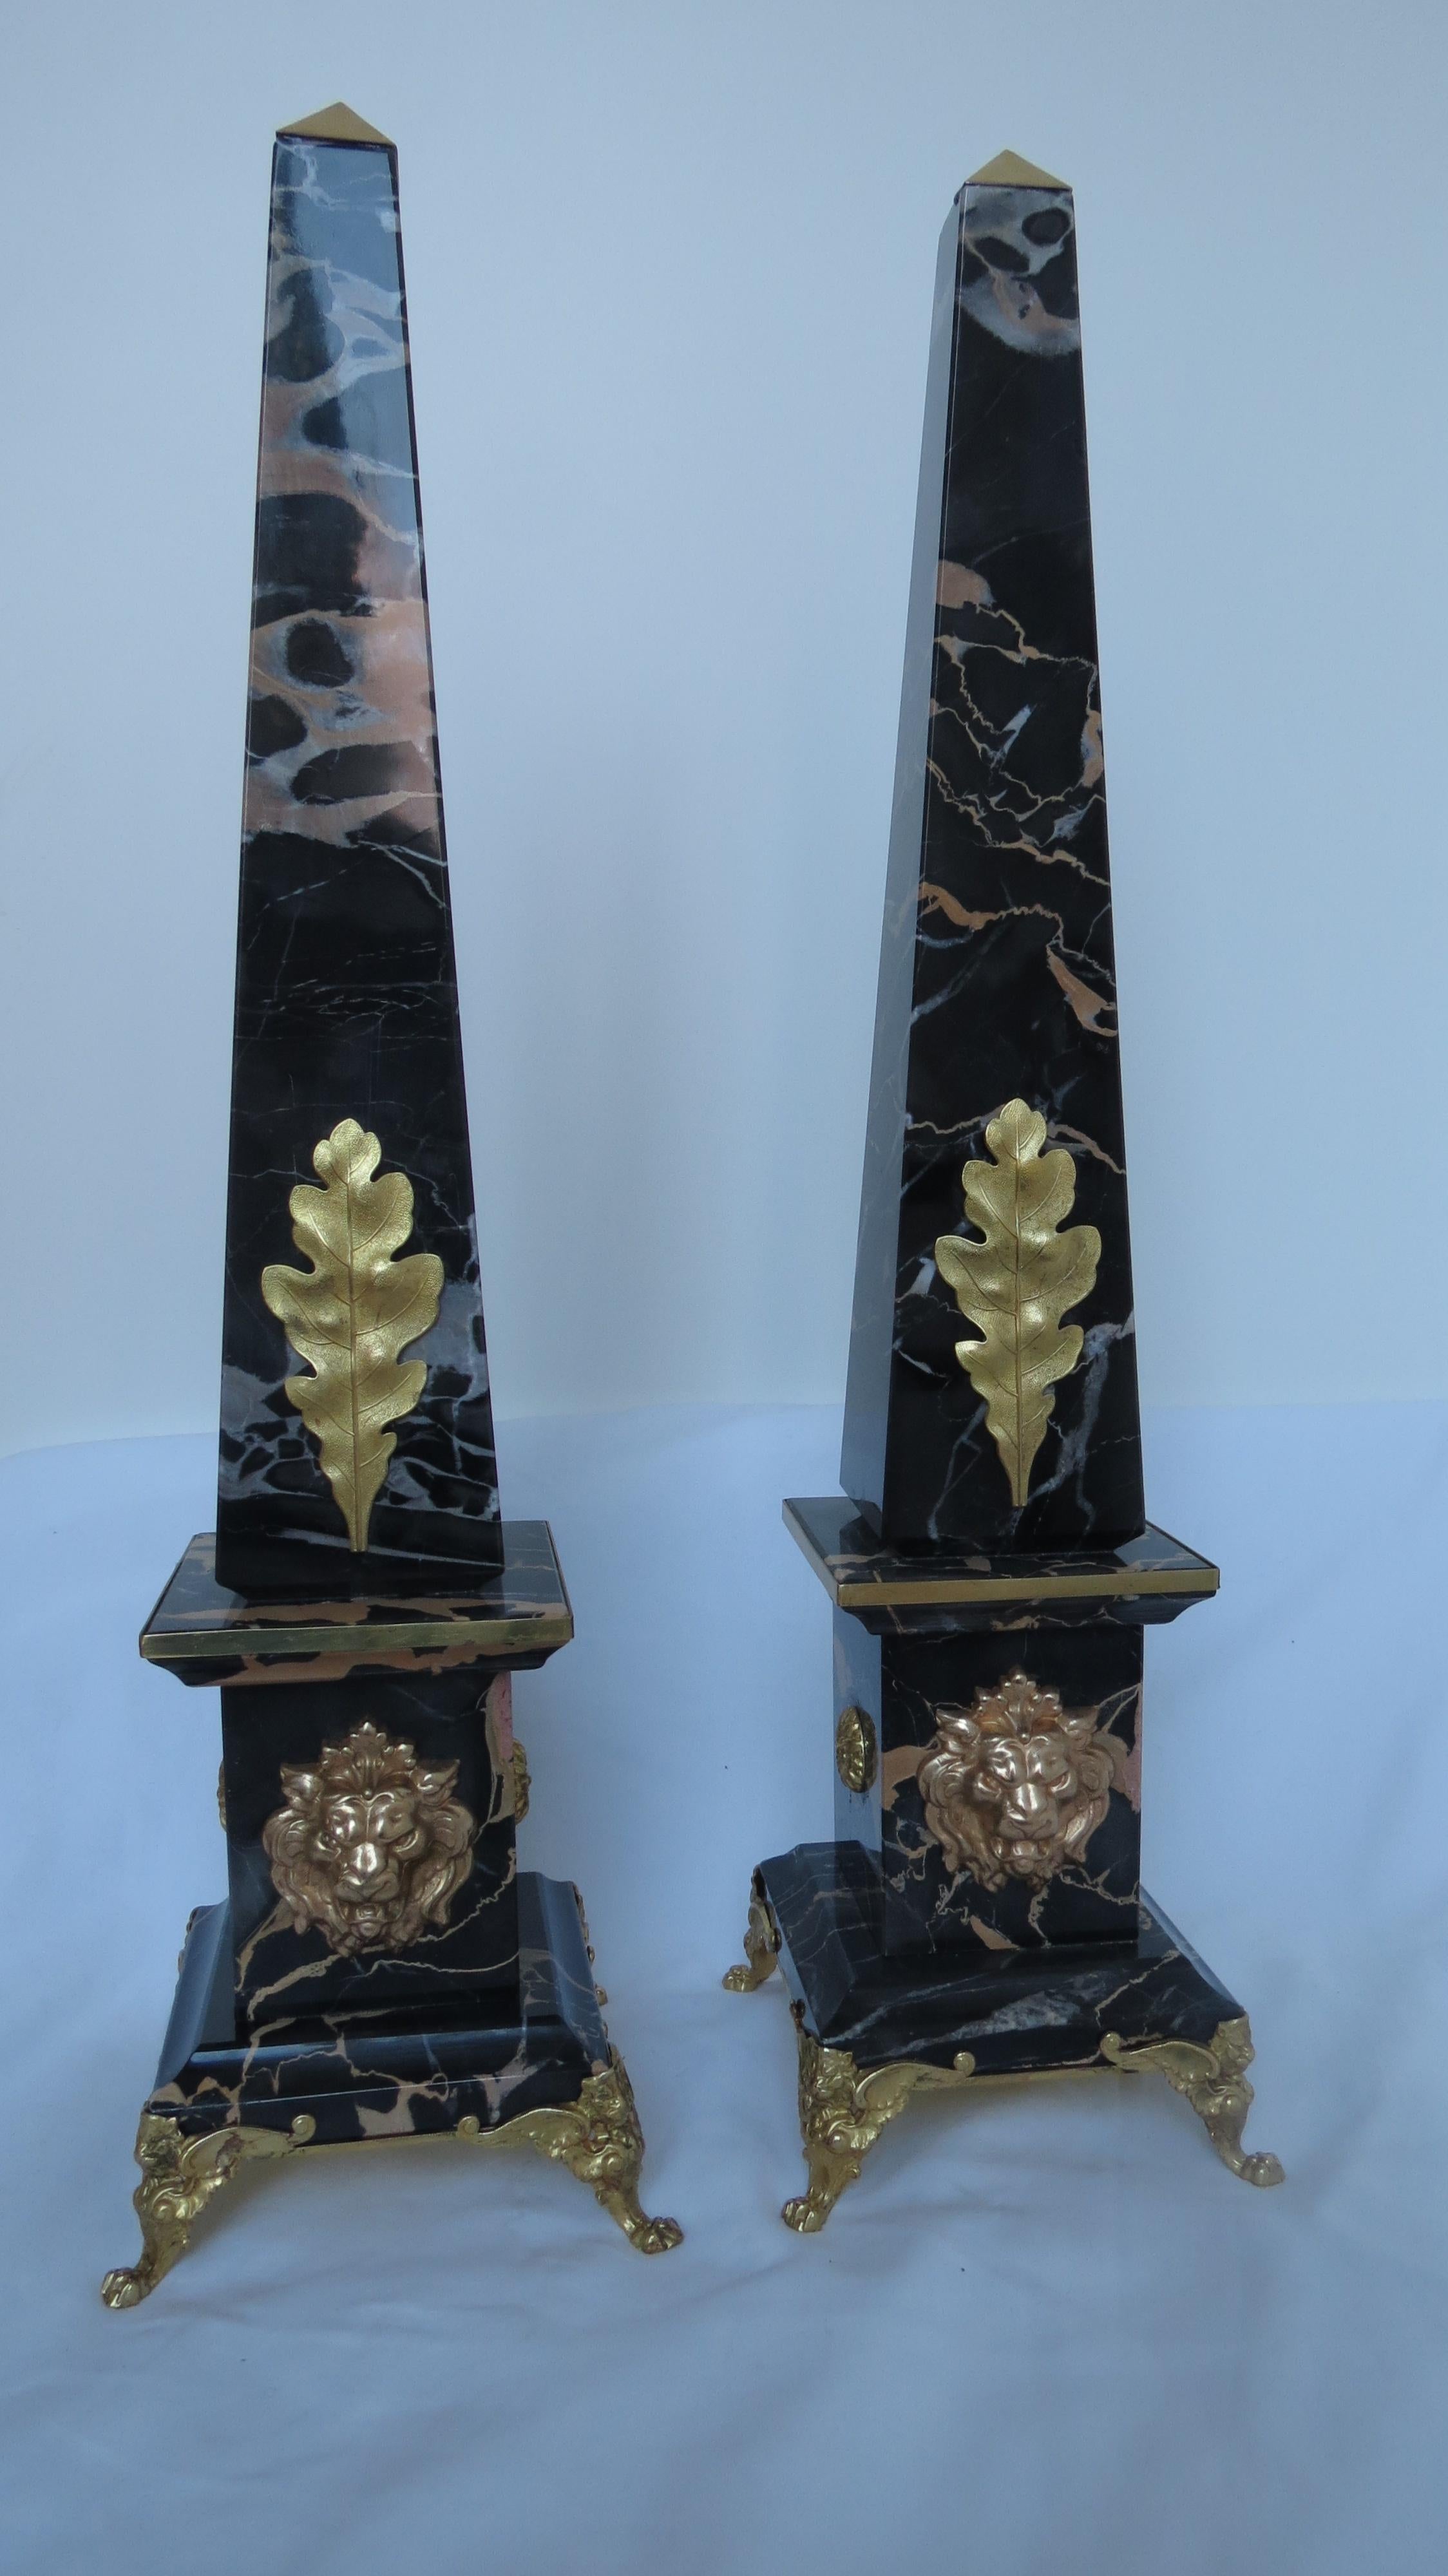 Pair of Italian portoro marble and bronze obelisks, gold lion -Grand Tour collection-
produced by Lorenzo Ciompi, 2017 designed, produced and executed directly in exclusivity for Compendio gallery on limited edition of 10.
Extremely rare portoro